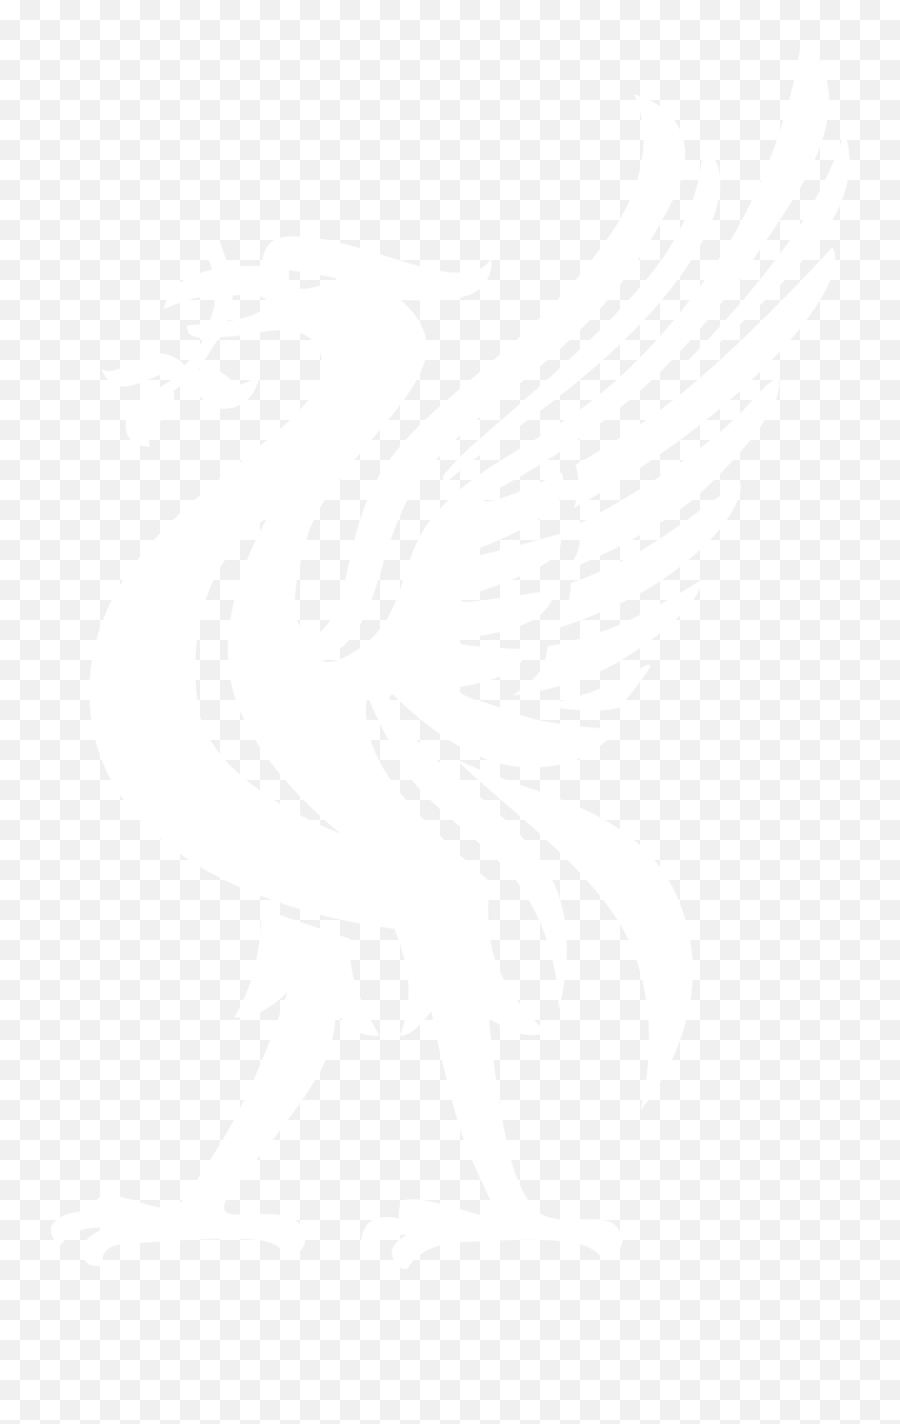 Liverpool Fc Png Image With No - Liverpool Fc Emoji,Liverpool Logo